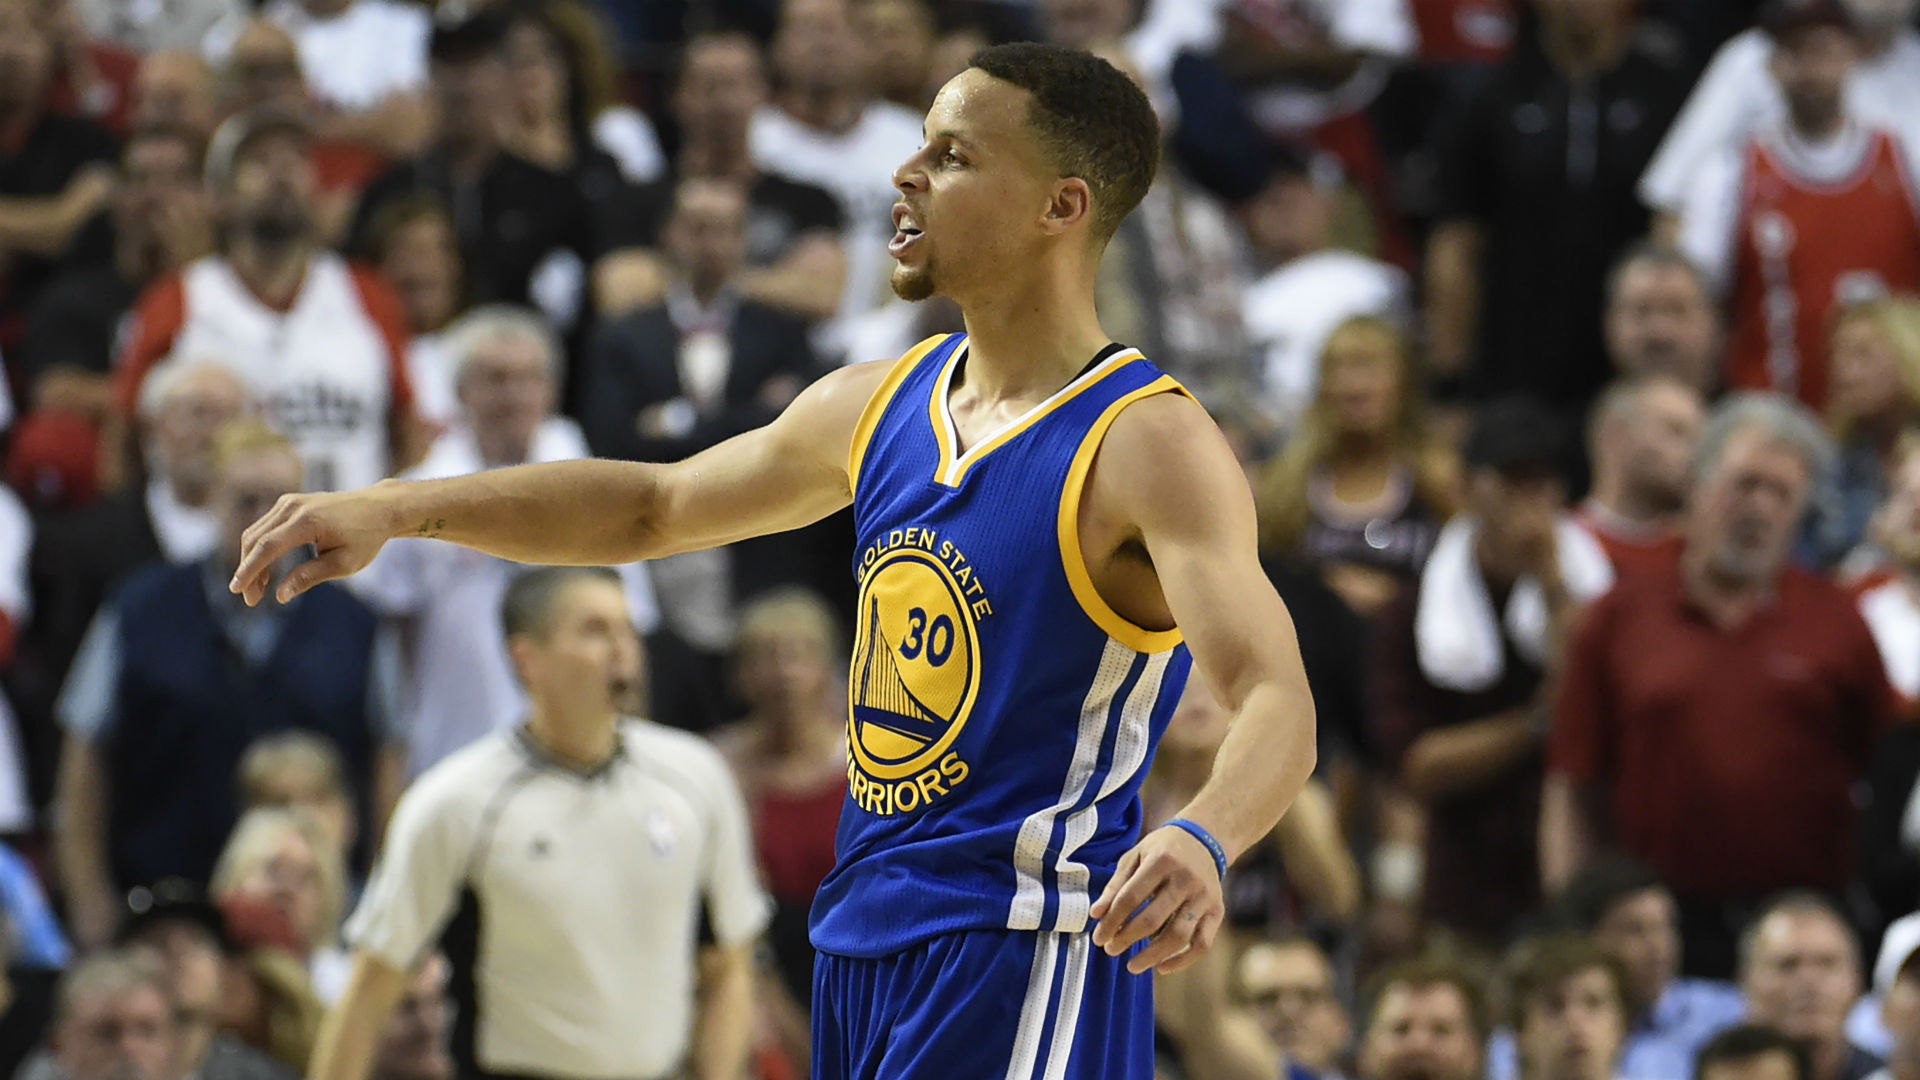 Steph Curry announces he's back with historic OT performance